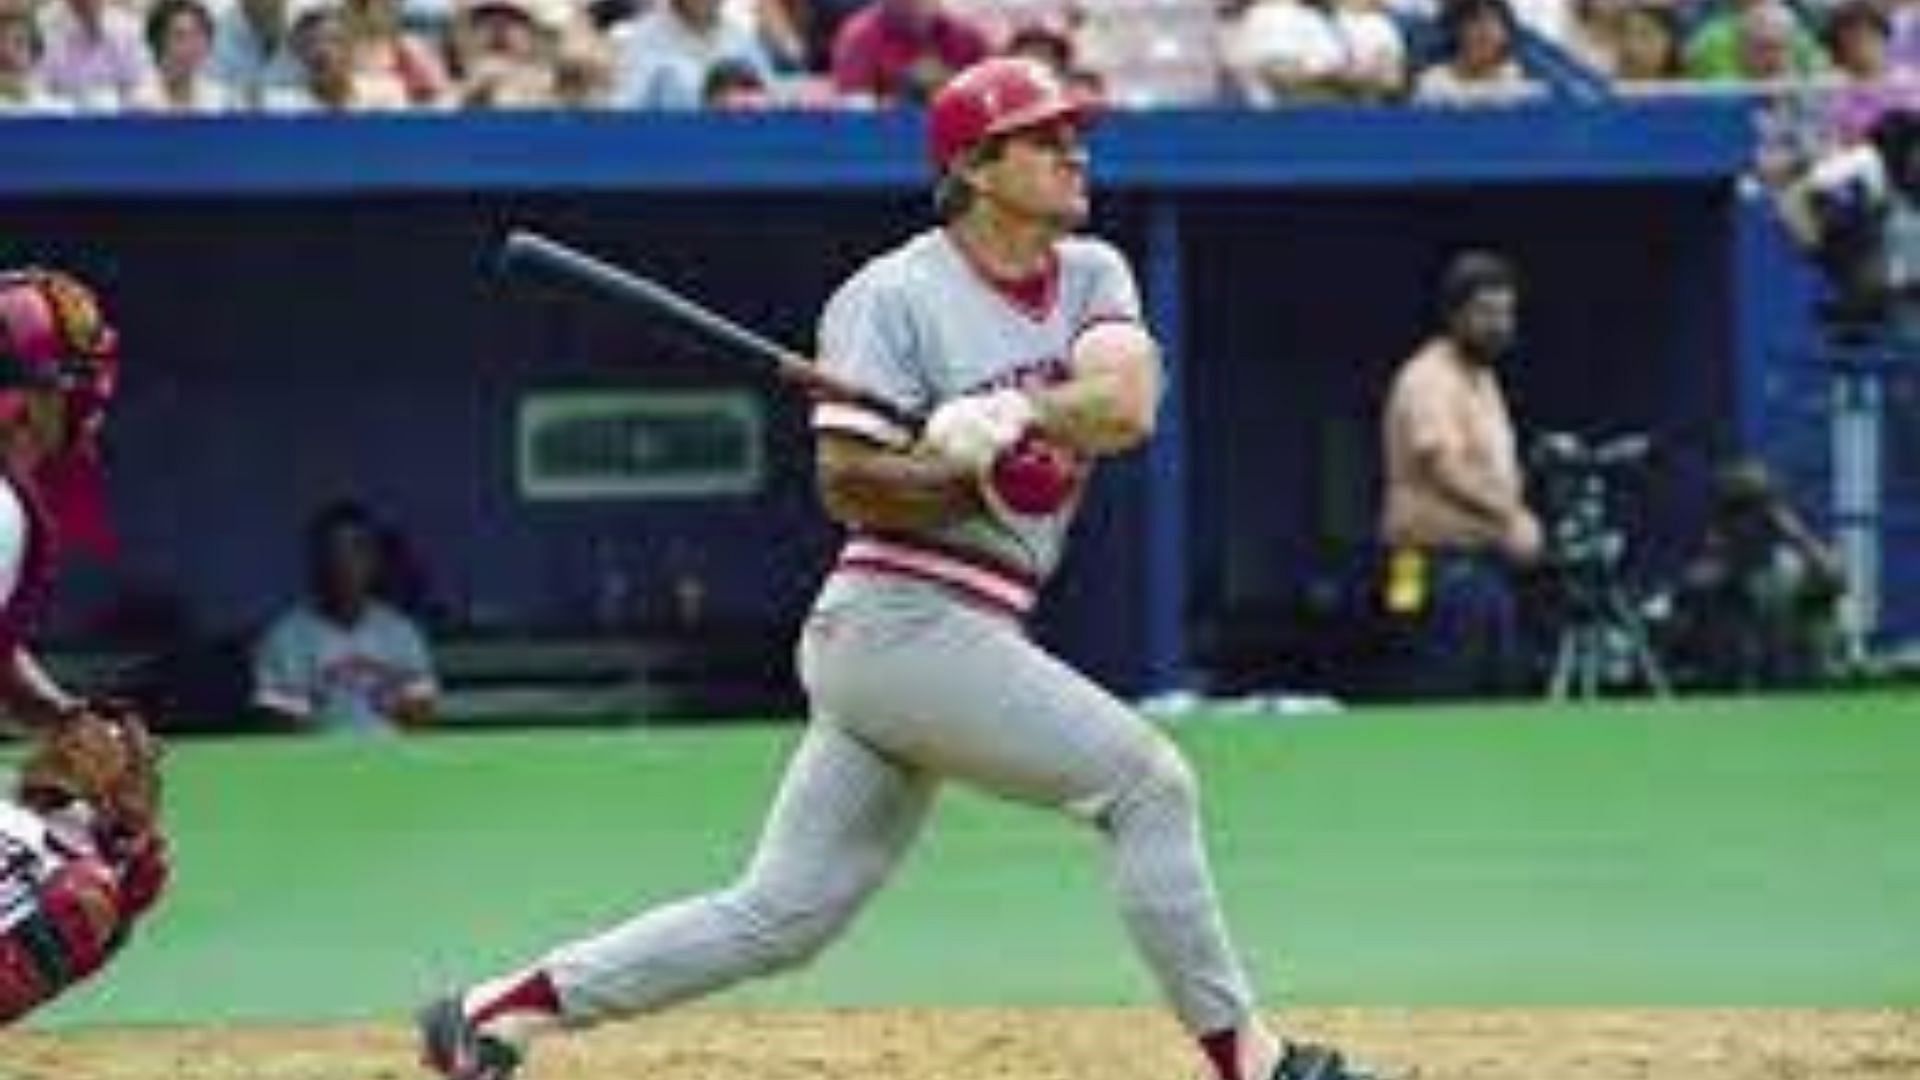 Mar 15, 2007 - Cincinnati, OH, USA - MLB career hits leader Pete Rose was  banned from baseball for life after being convicted of betting on baseball  while he was manager of